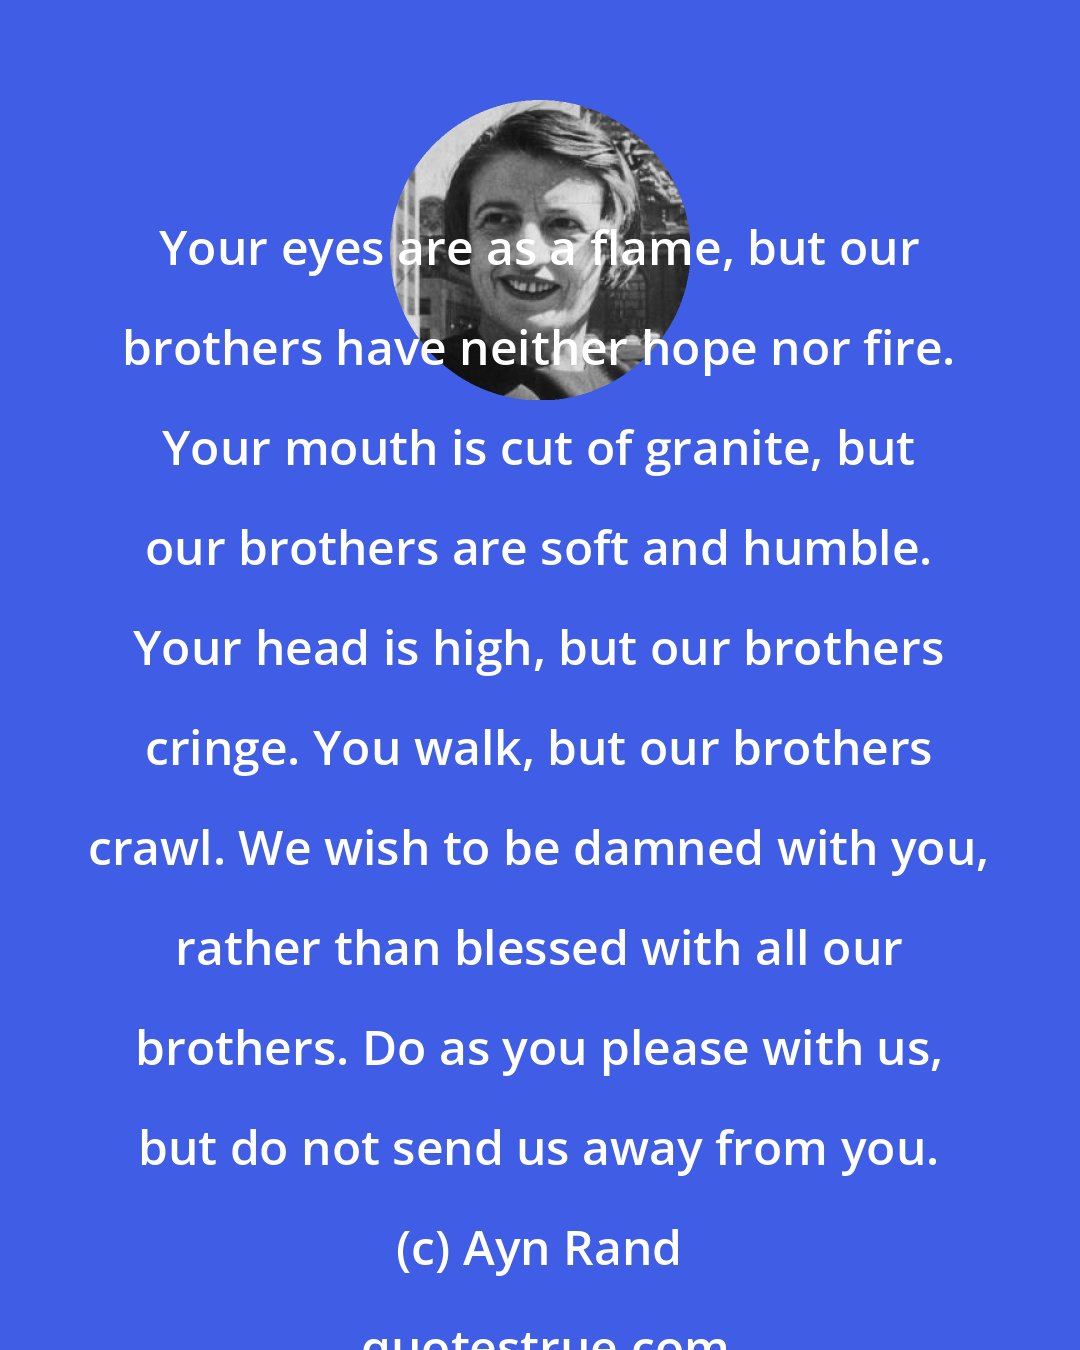 Ayn Rand: Your eyes are as a flame, but our brothers have neither hope nor fire. Your mouth is cut of granite, but our brothers are soft and humble. Your head is high, but our brothers cringe. You walk, but our brothers crawl. We wish to be damned with you, rather than blessed with all our brothers. Do as you please with us, but do not send us away from you.